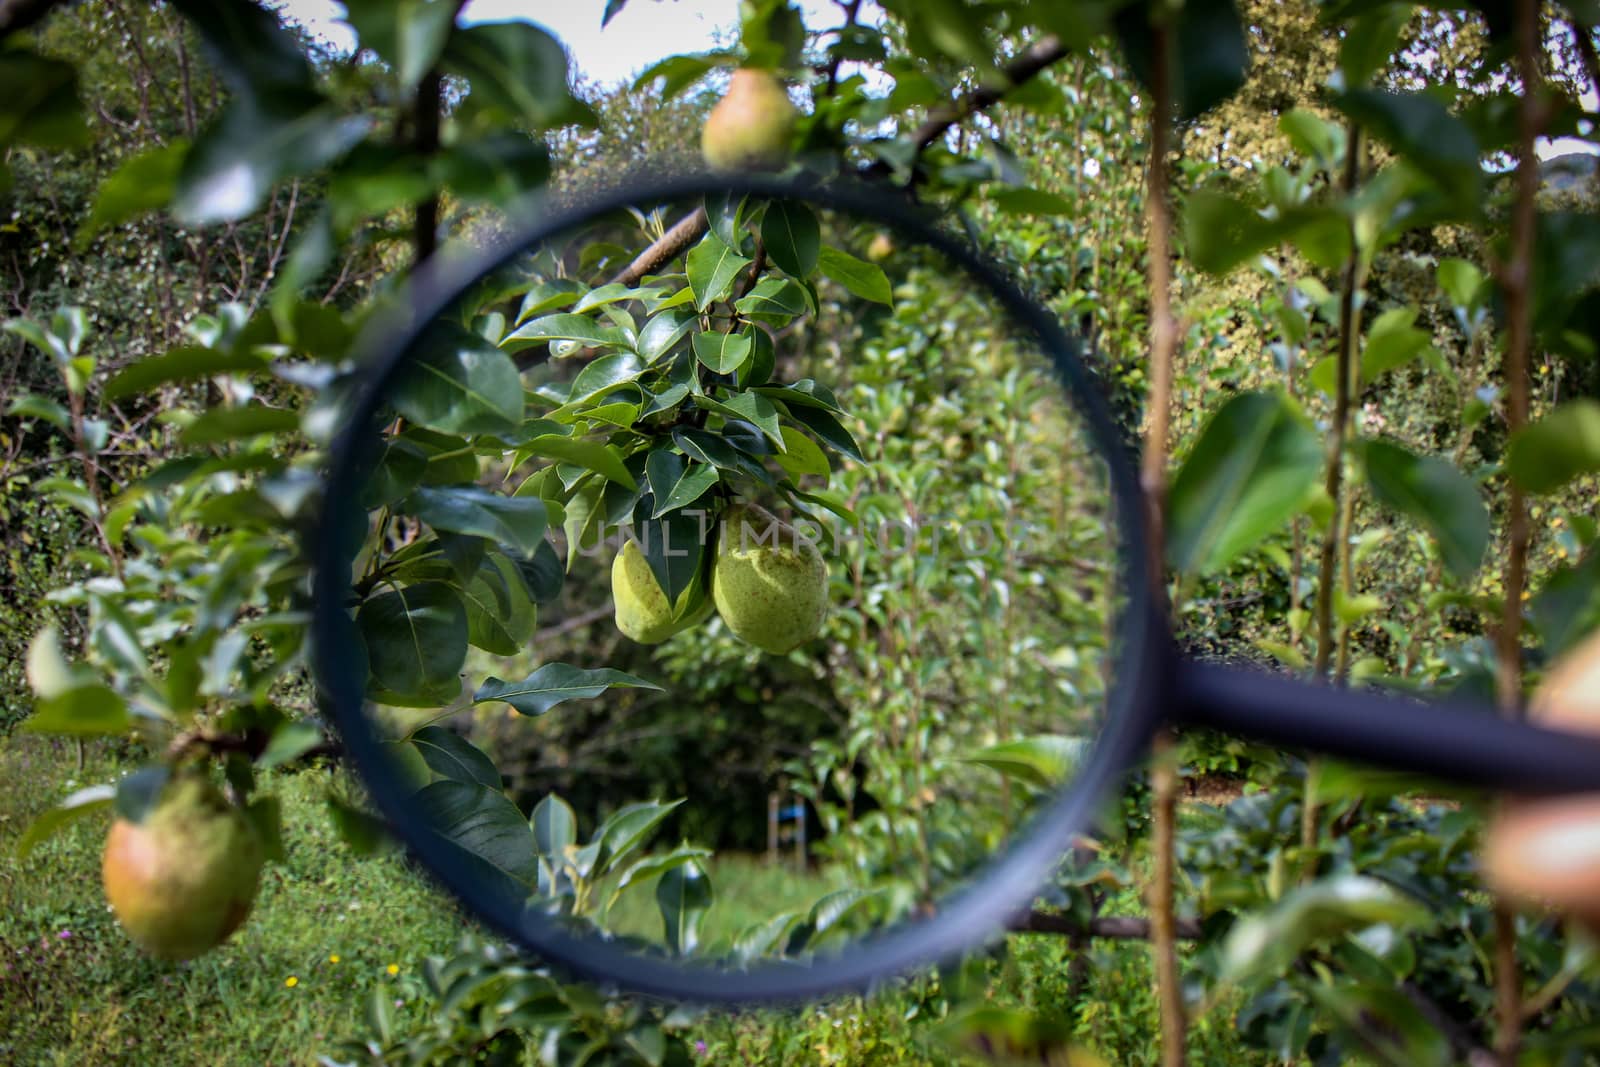 Two green pears magnified with a magnifying glass on a branch. Determination of pear maturity. Zavidovici, Bosnia and Herzegovina.